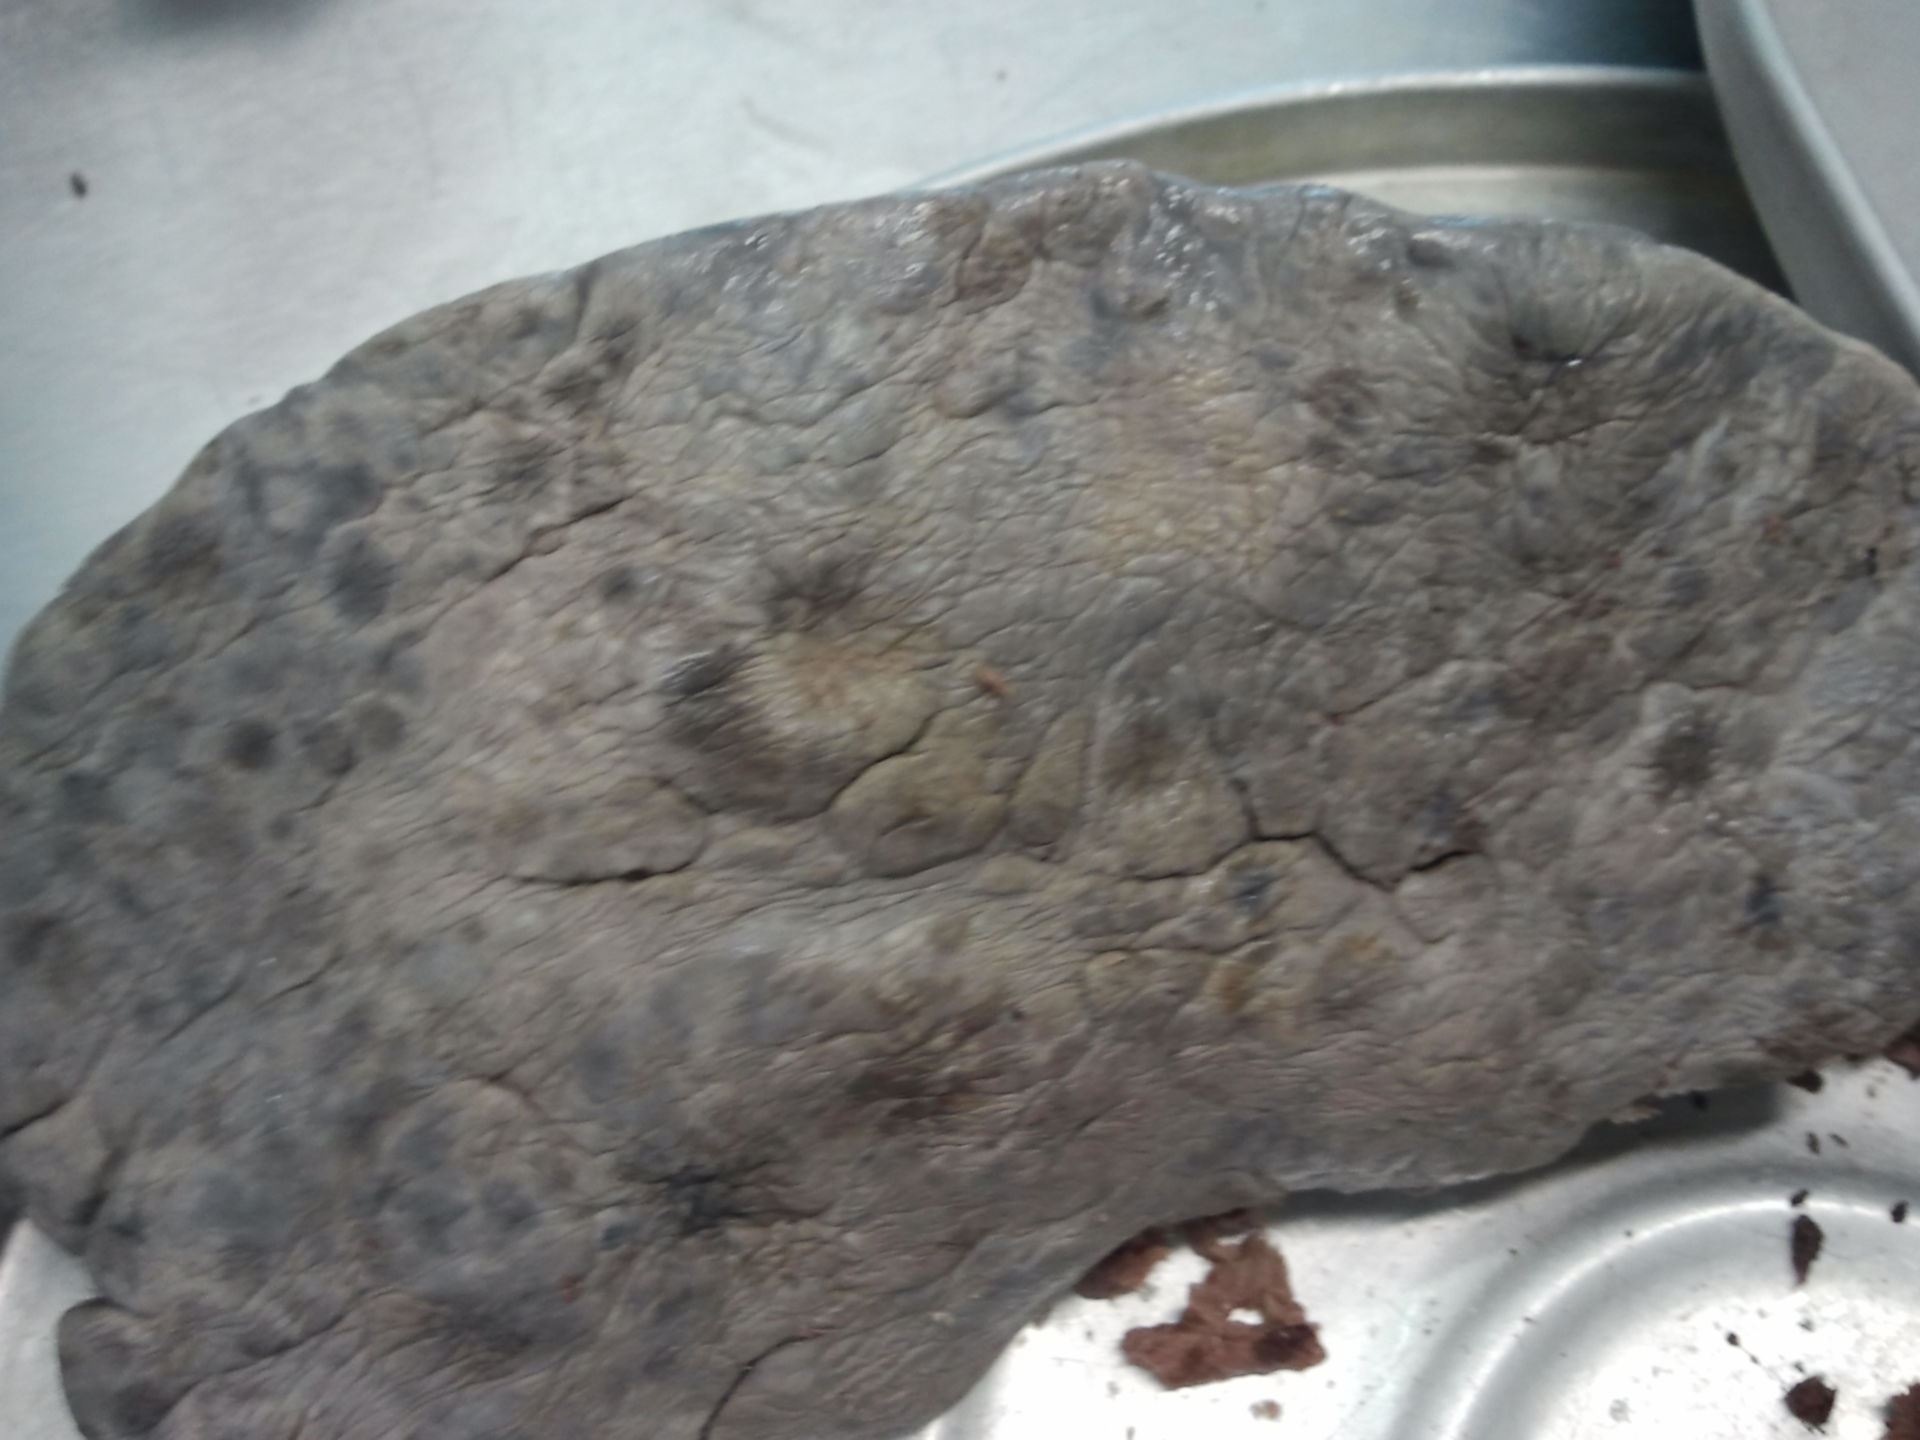 Liver with metastases